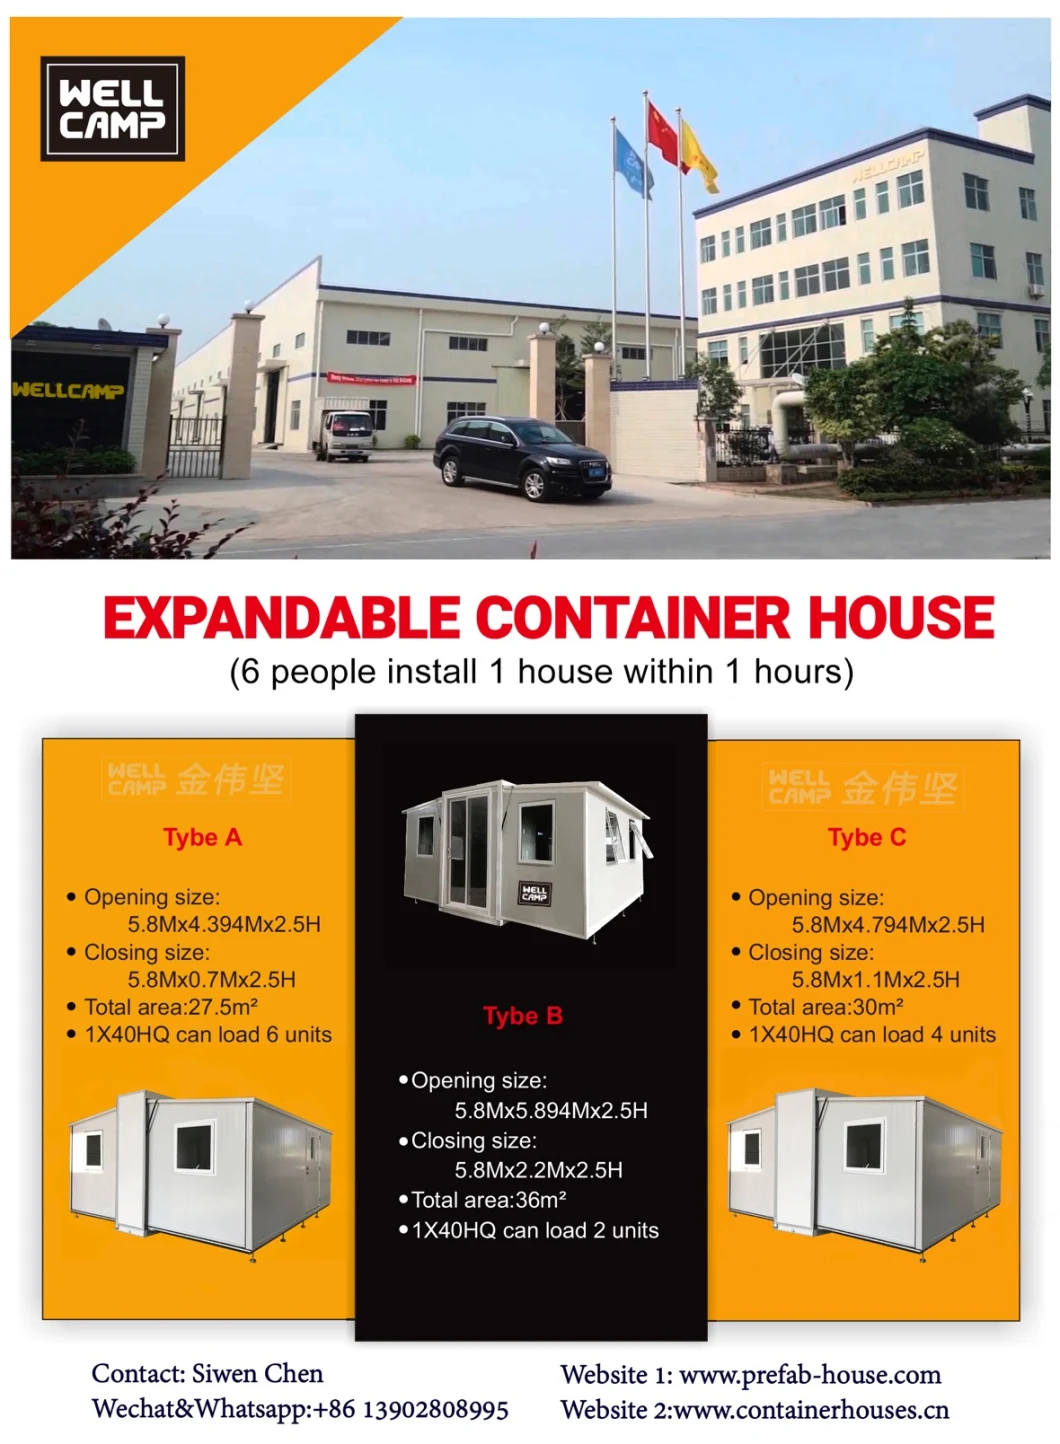 Hot Sell Prefabricated Modular Flat Pack Tiny Portable Mobile Readymade Assemble Modified Container Cabin/Office/House